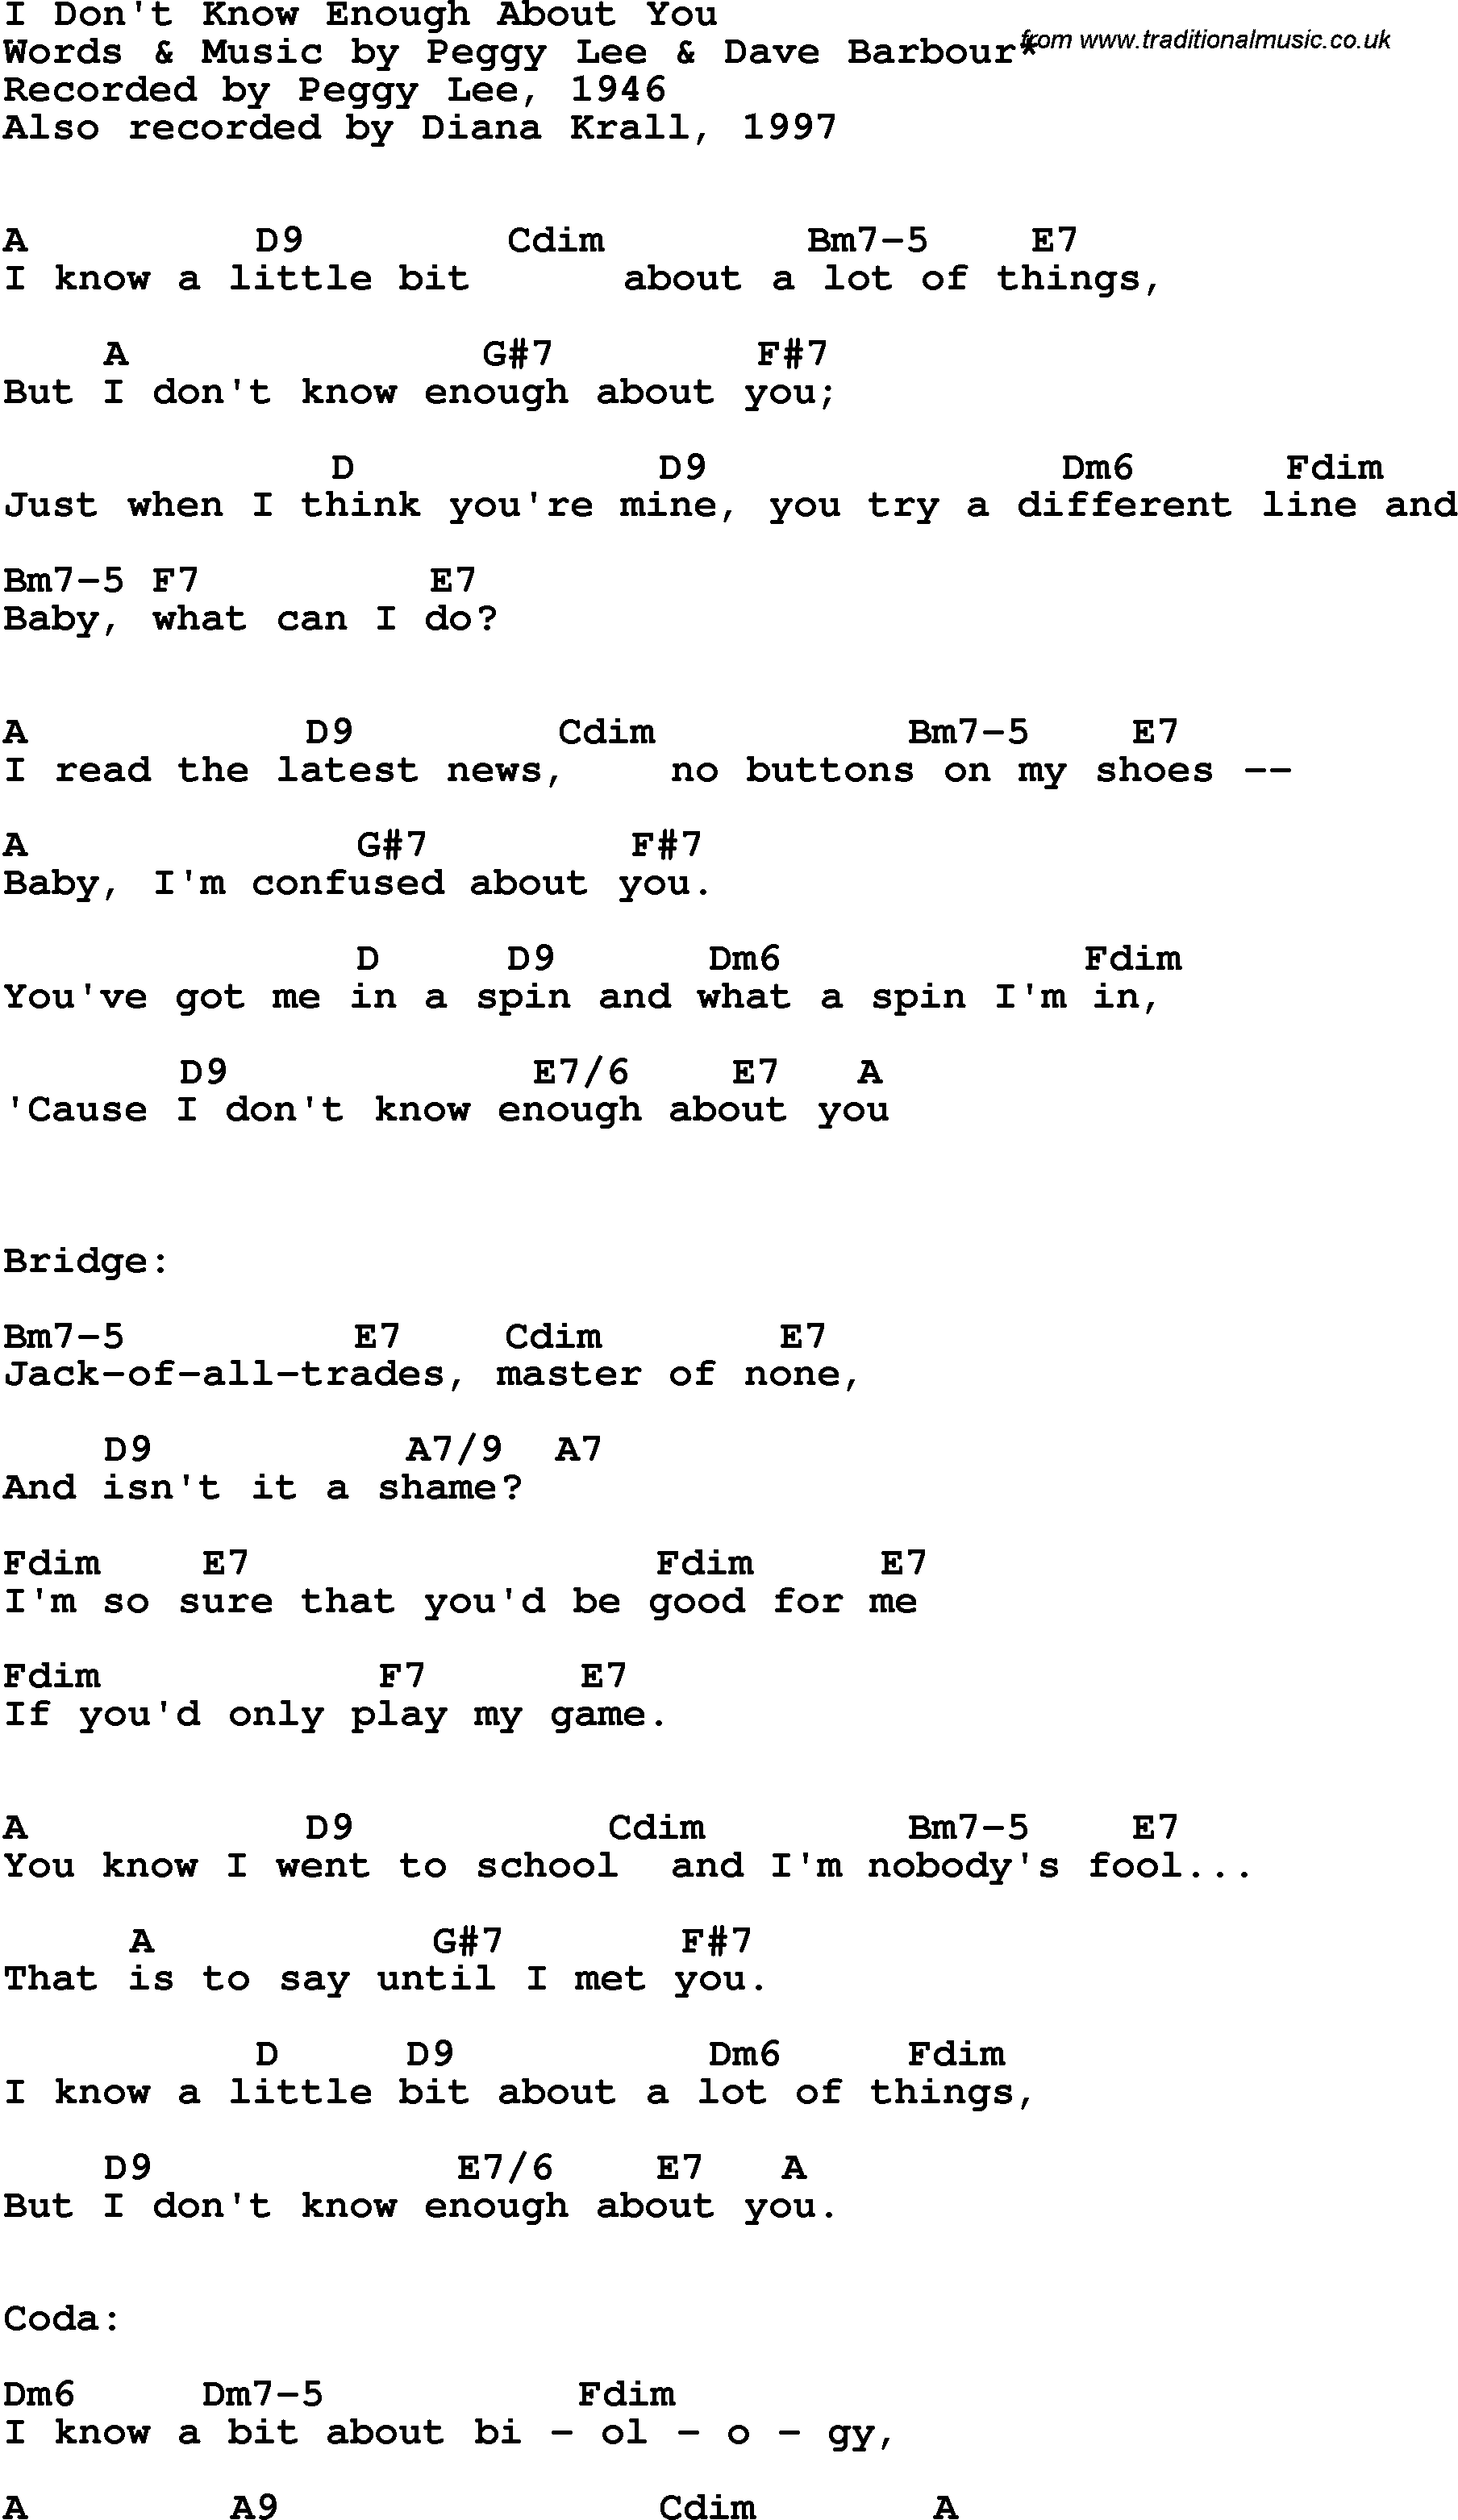 Song Lyrics with guitar chords for I Don't Know Enough About You - Peggy Lee, 1946